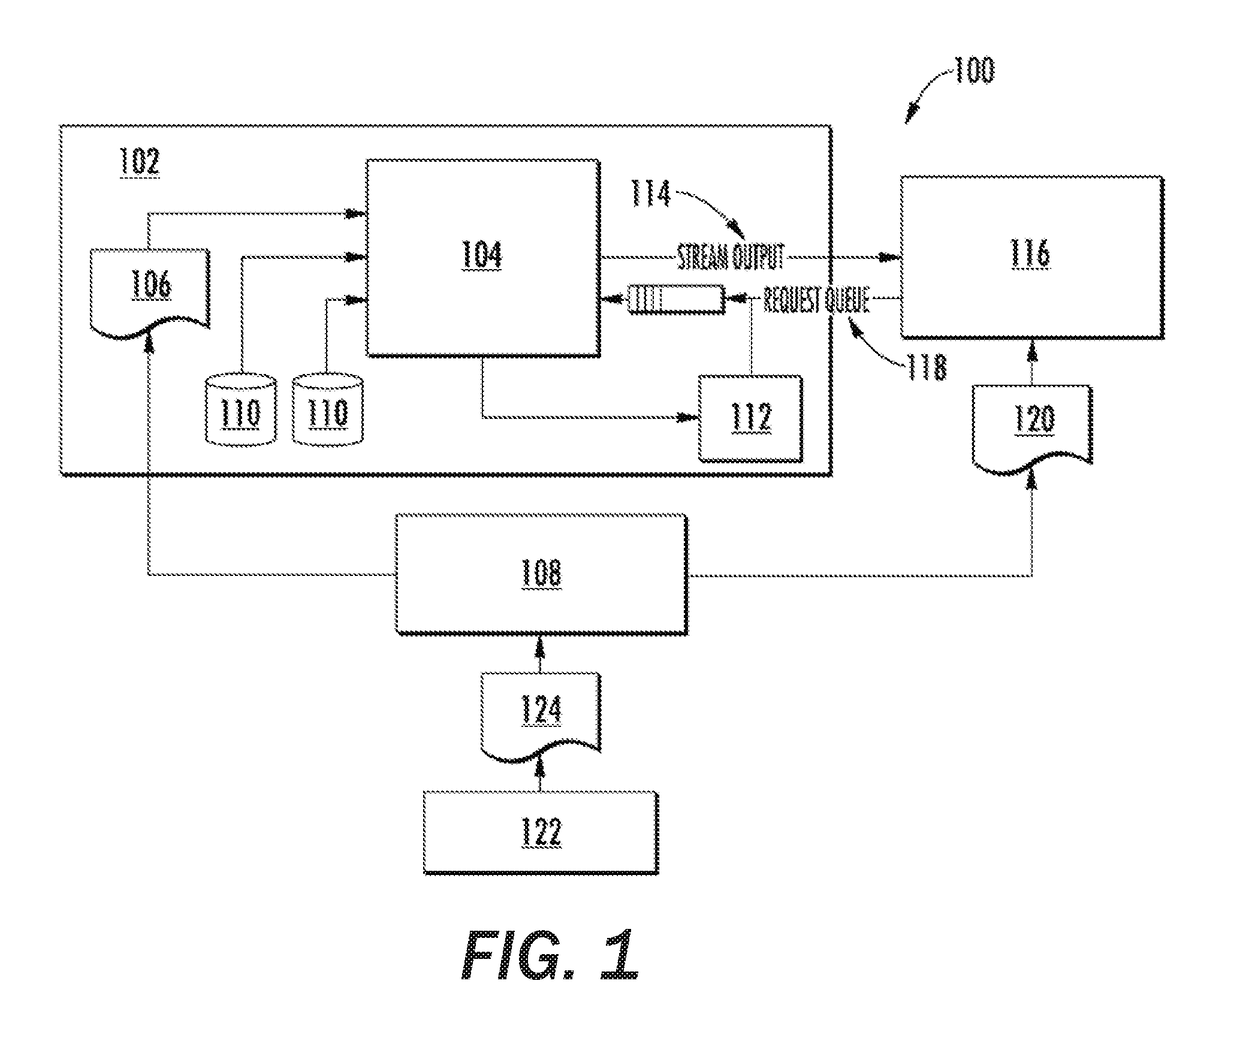 Systems and Methods for Flexible Access of Internal Data of an Avionics System